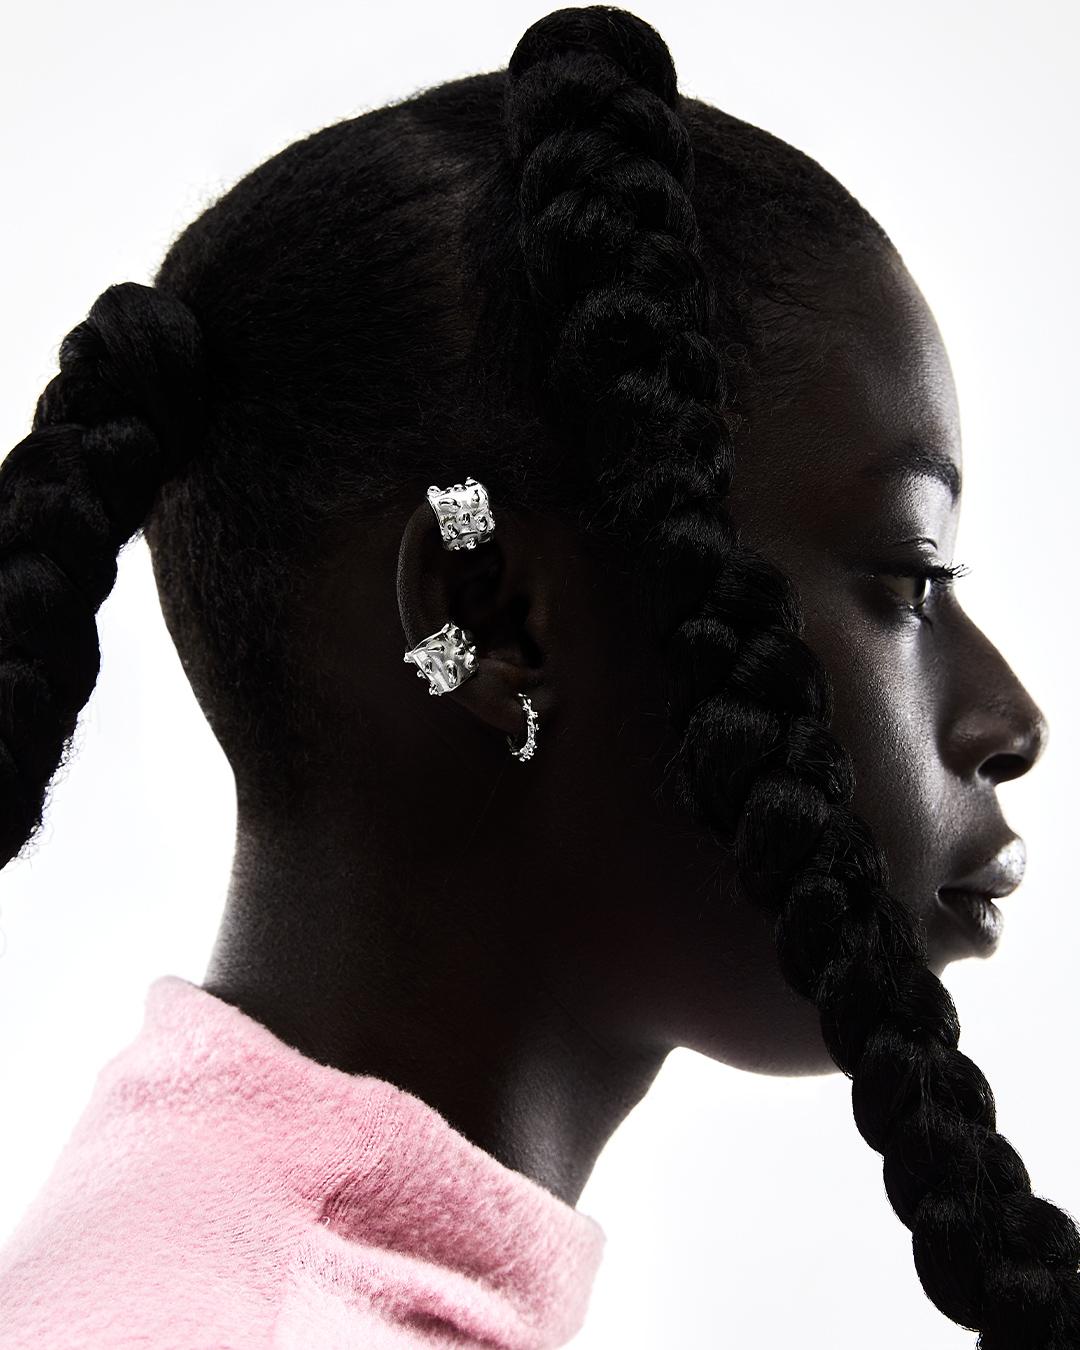 SO2 is a Silver ear cuff consisting of an organic shape with little spots.

This unique accessory is designed to adorn your ear without the need for piercings.

Sold individually, this ear cuff is a statement piece that stands out on its own. You